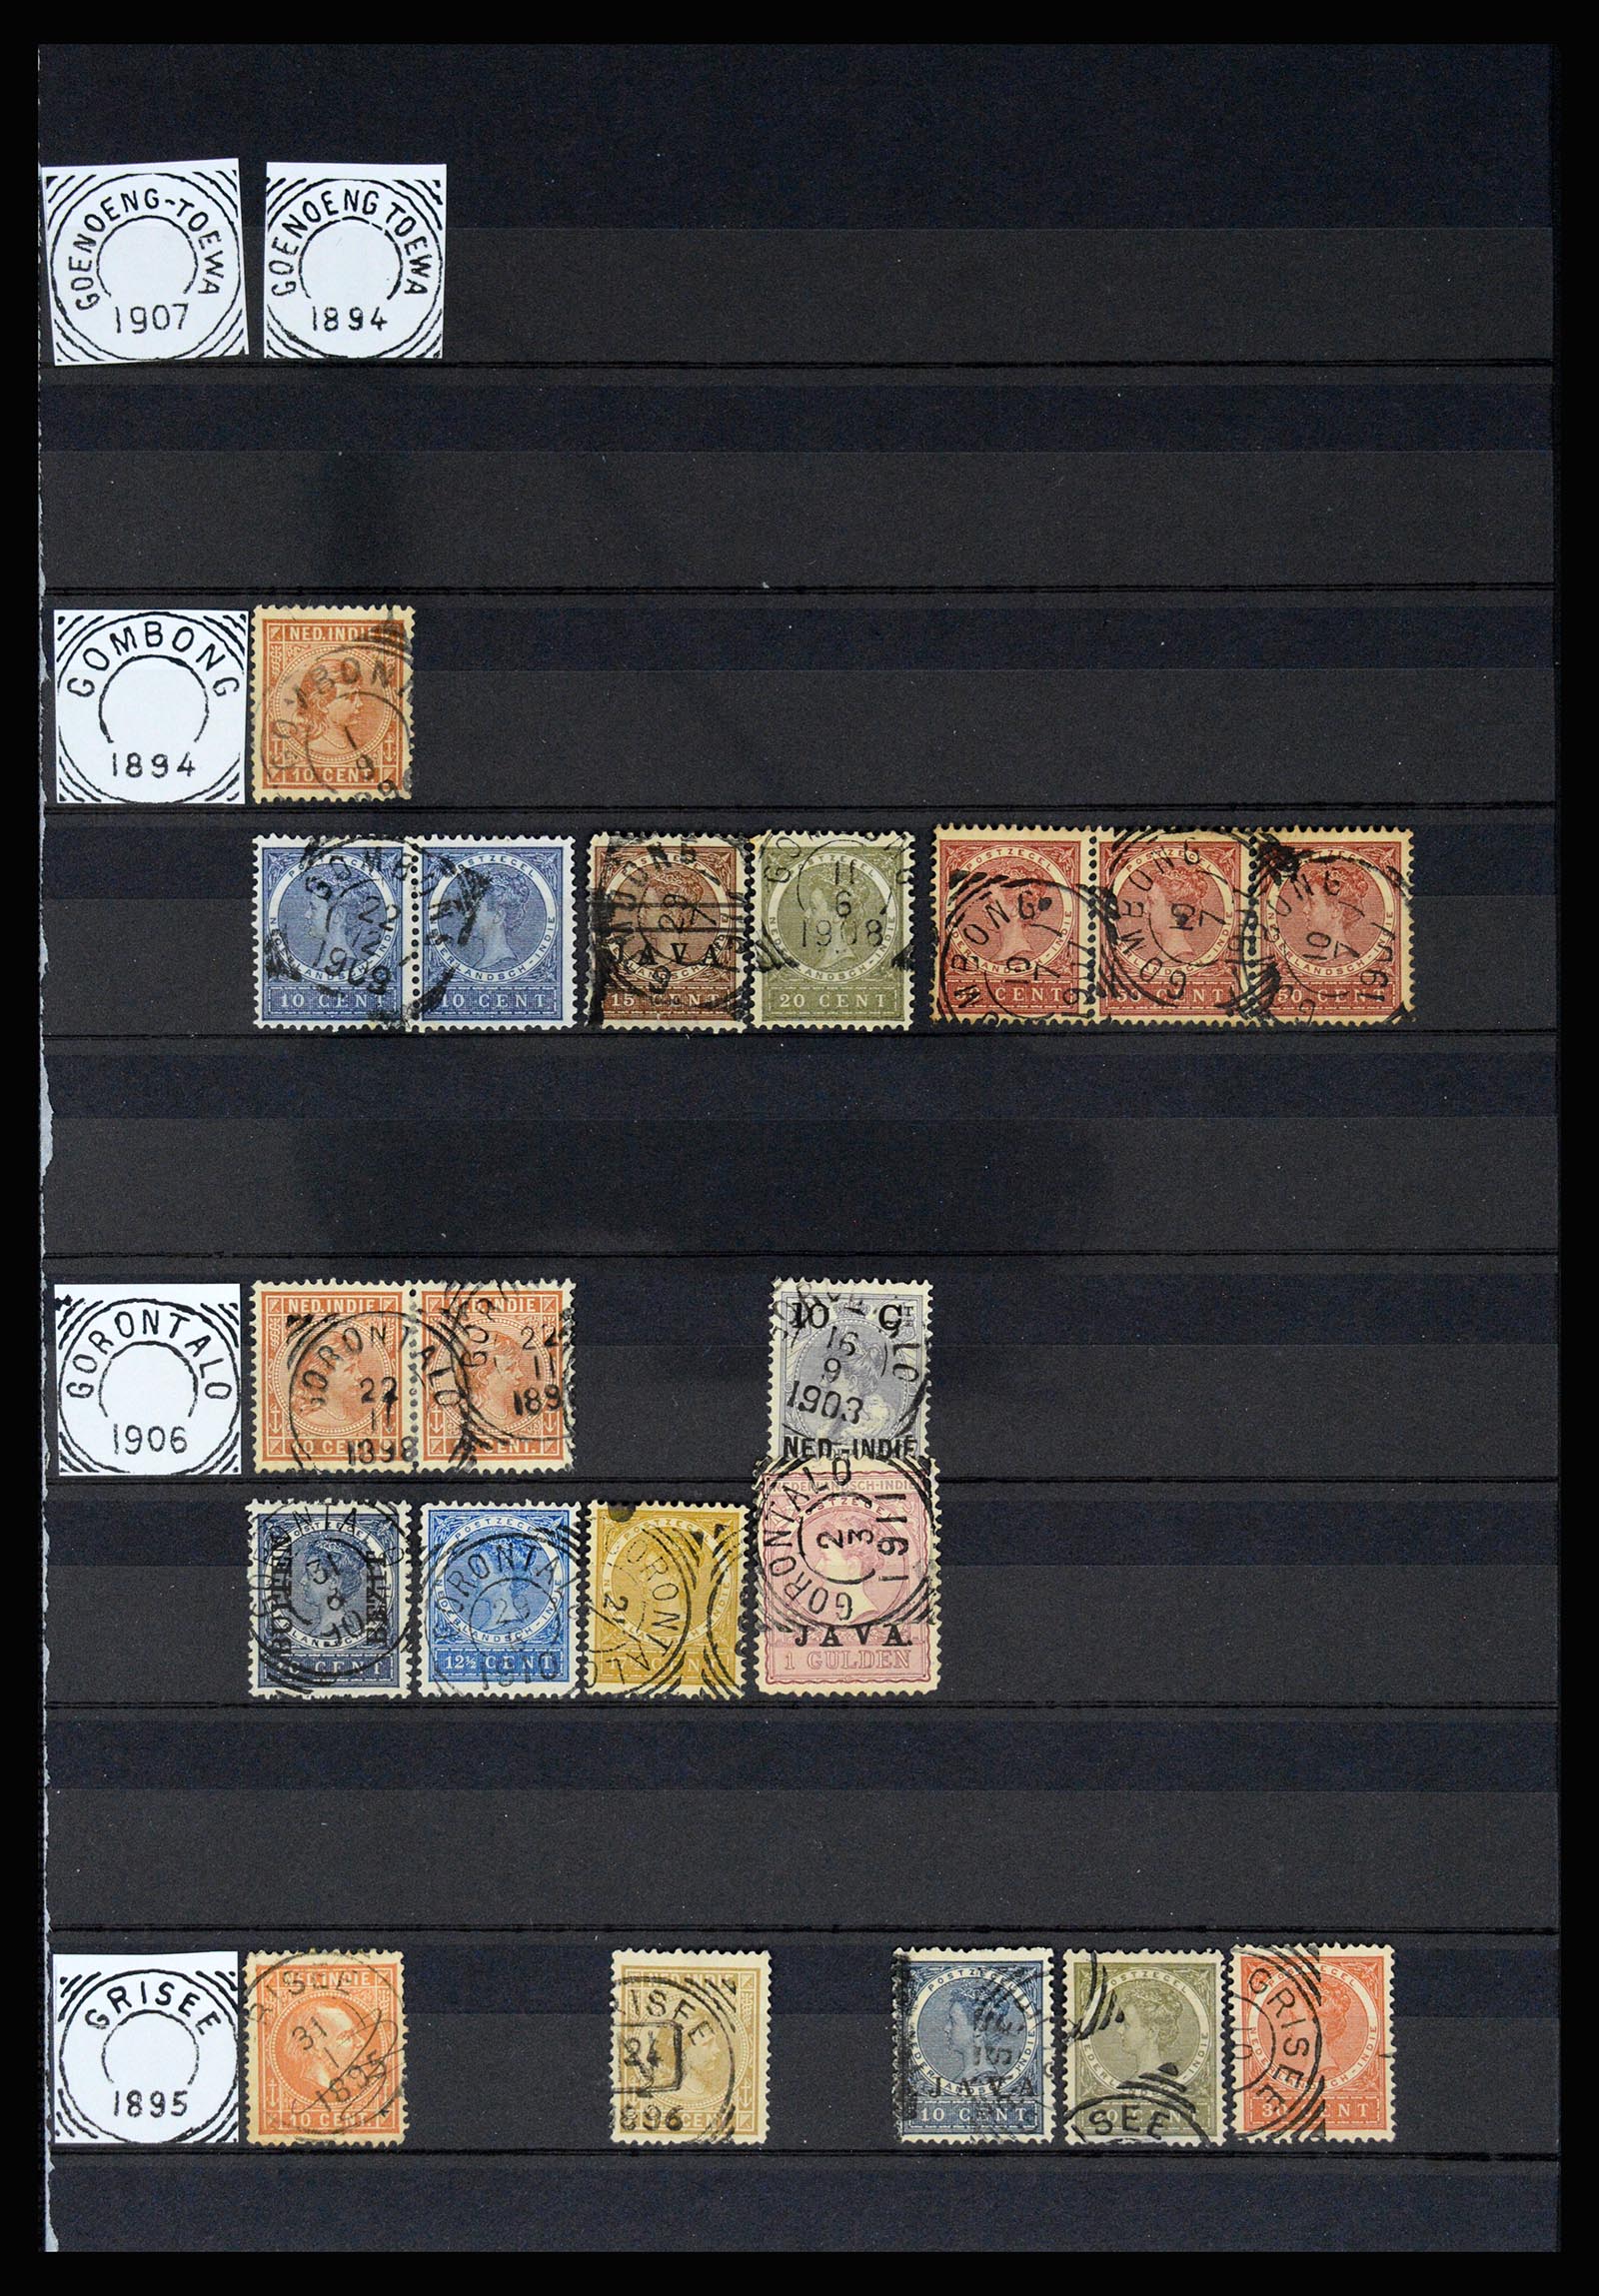 36839 016 - Stamp collection 36839 Dutch east Indies square cancels.